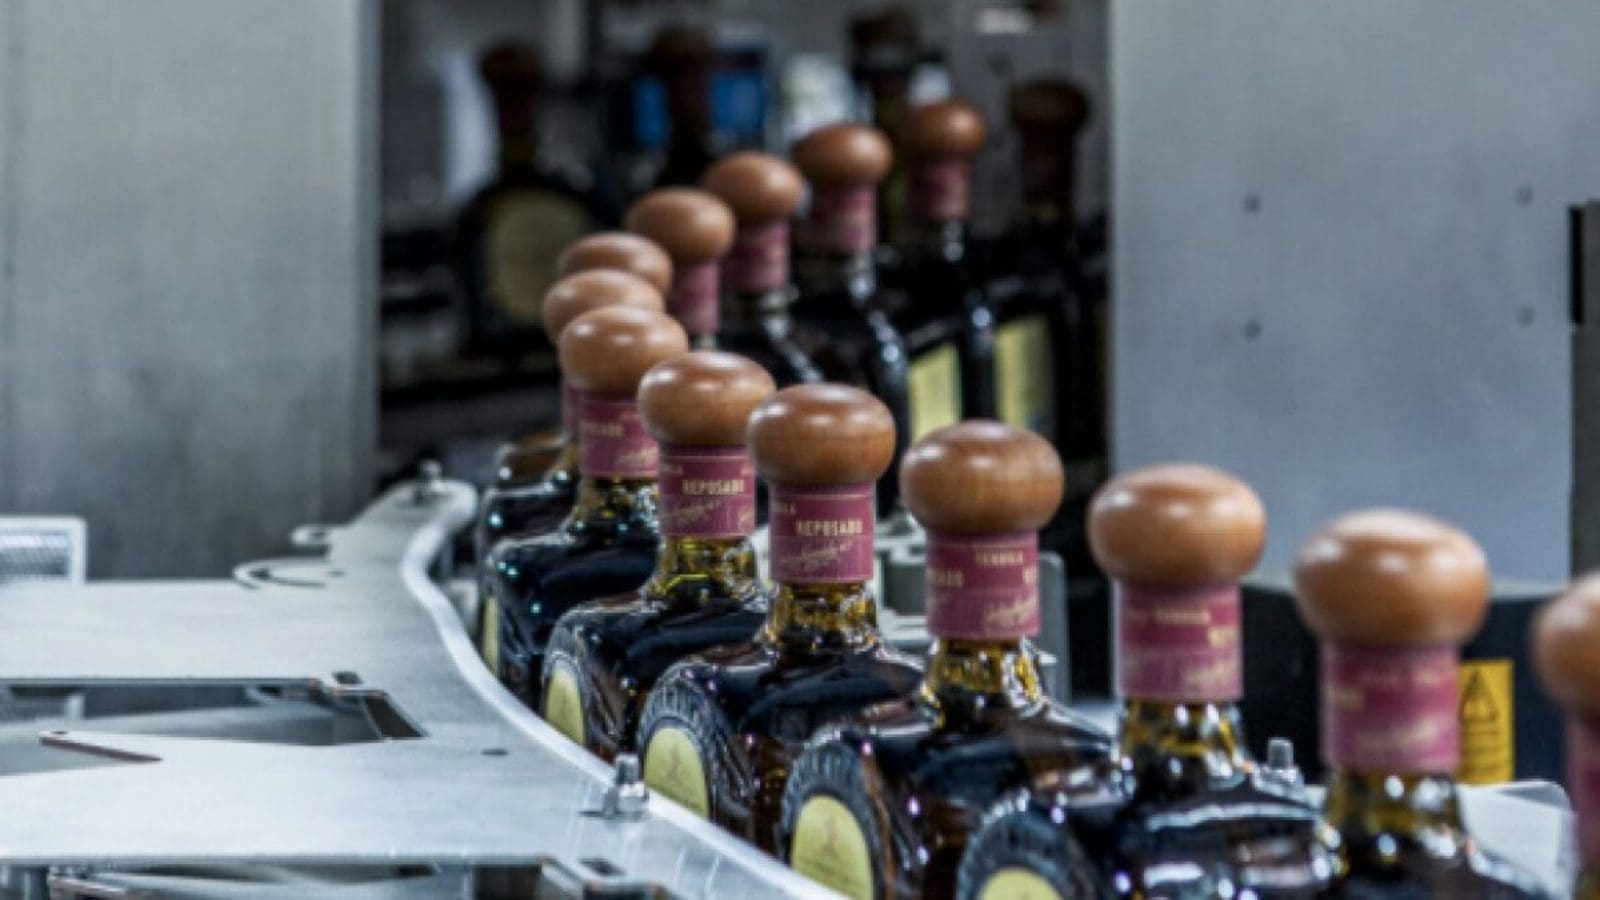 Diageo to expand tequila production capacity with US$500m investment in new facilities in Mexico